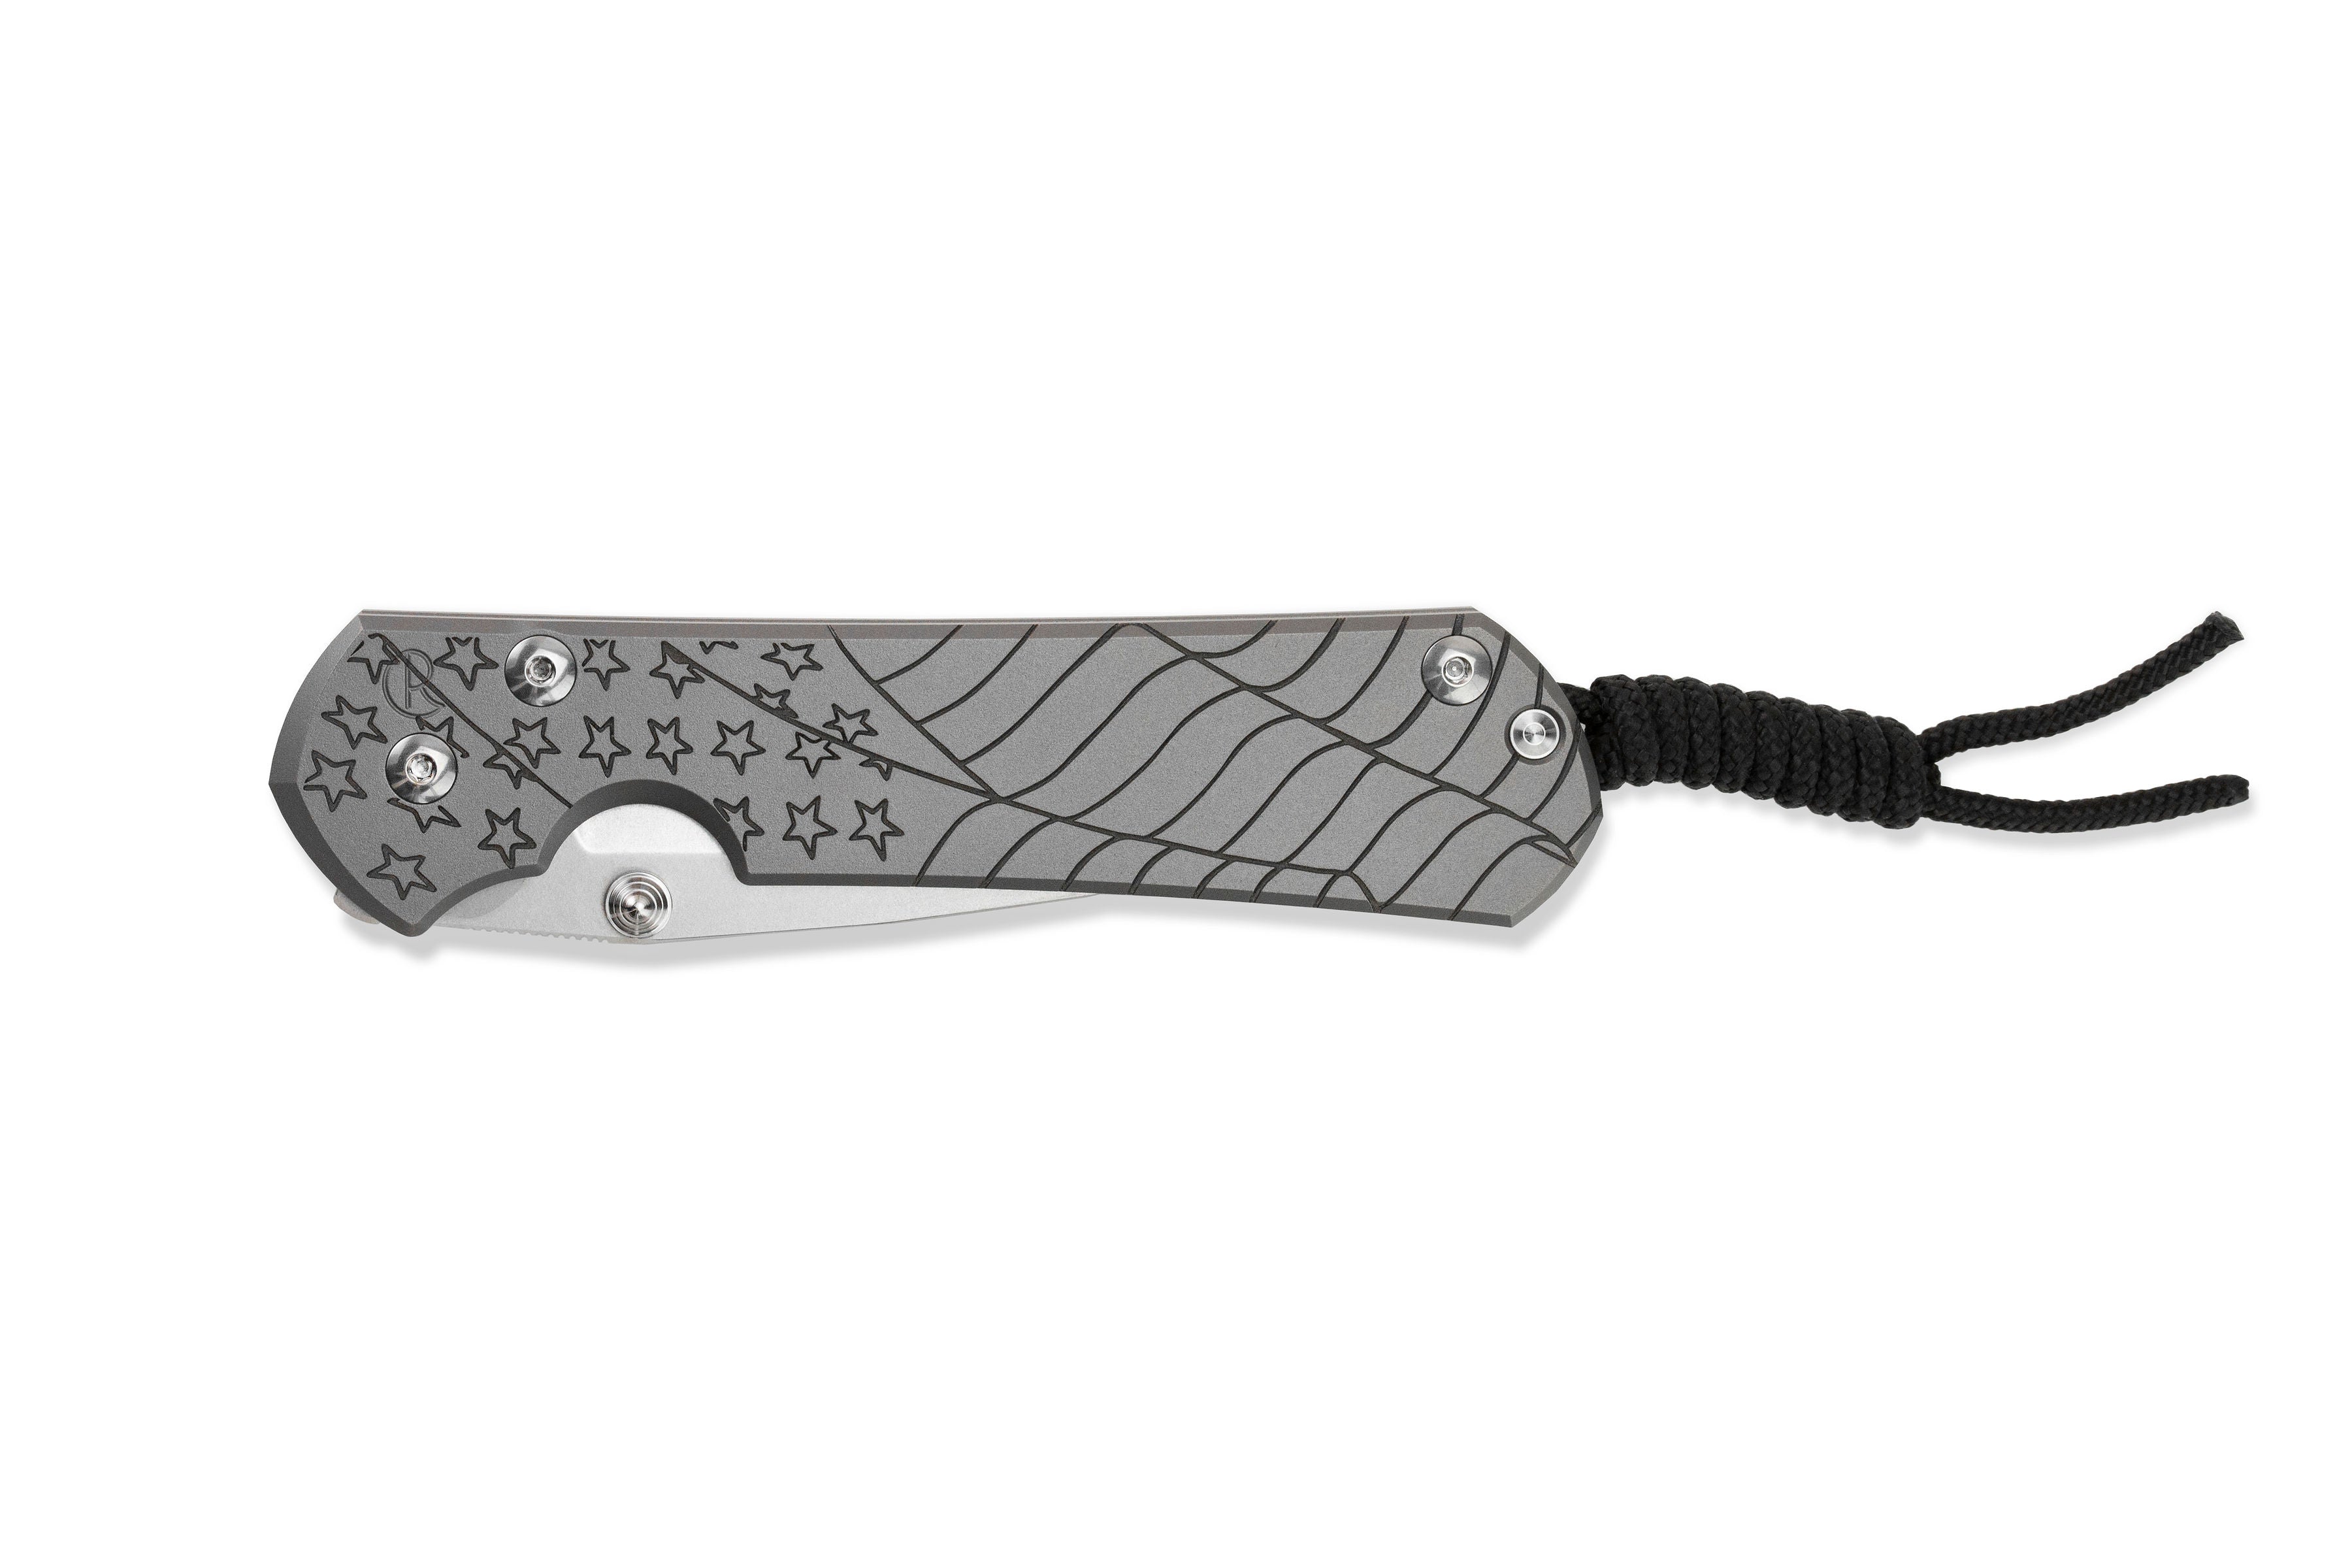 Chris Reeve - Small Sebenza 31 LEFT Handed - 2022 CGG "Forever Flag" - Drop Point - Glass Blasted - S31-1691